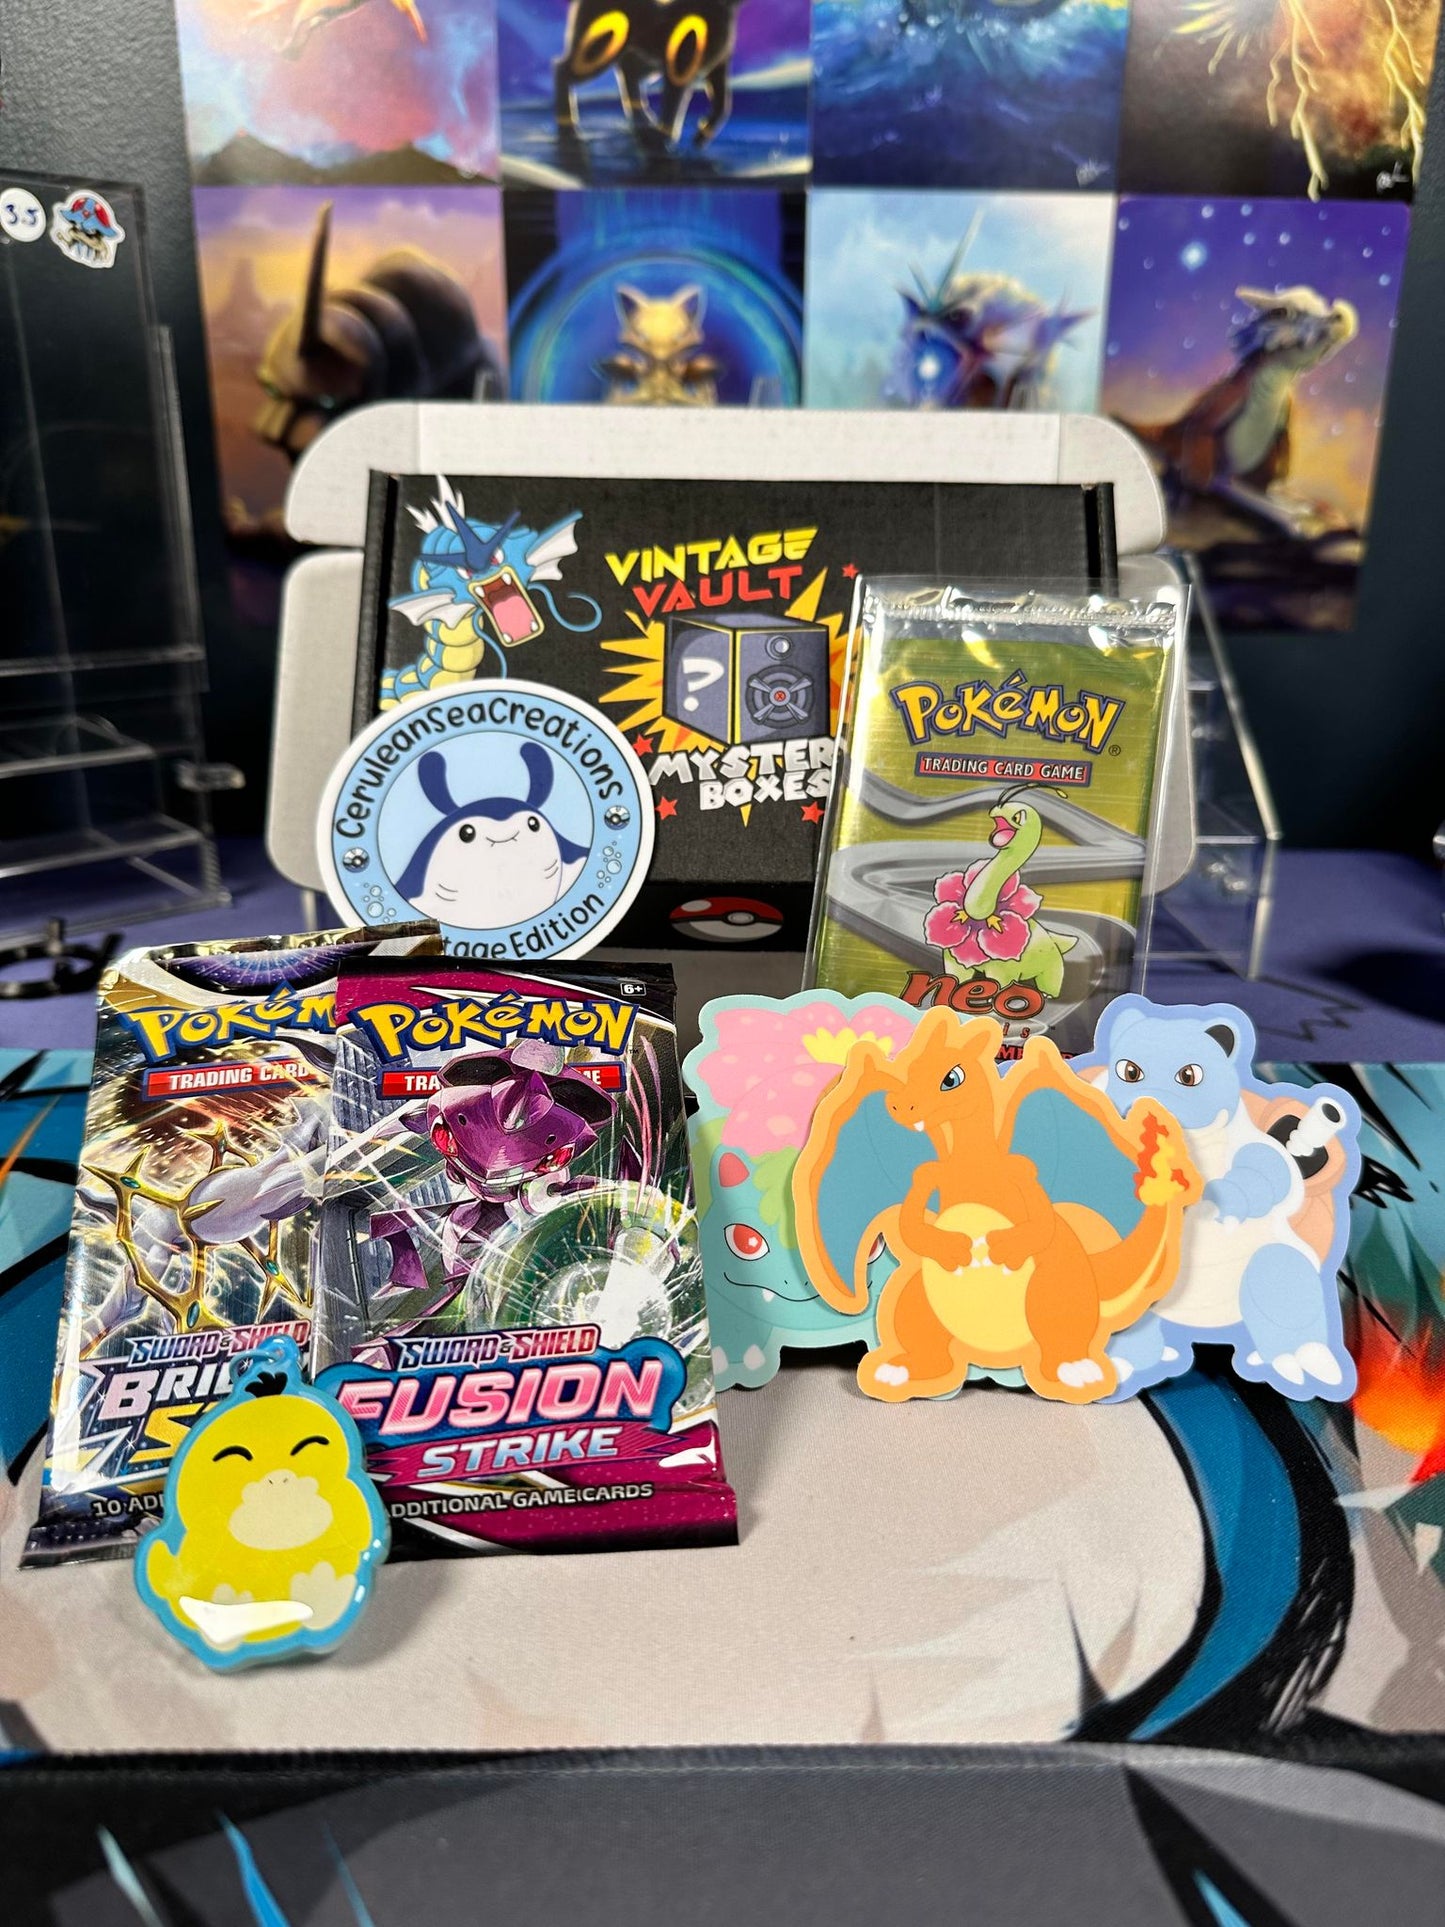 Mystery Box - CERULEAN EDITION! - Guaranteed WoTC Booster Pack in every box!! - Round 3 - DM on Instagram @VintageVaultPokemon for discounts!